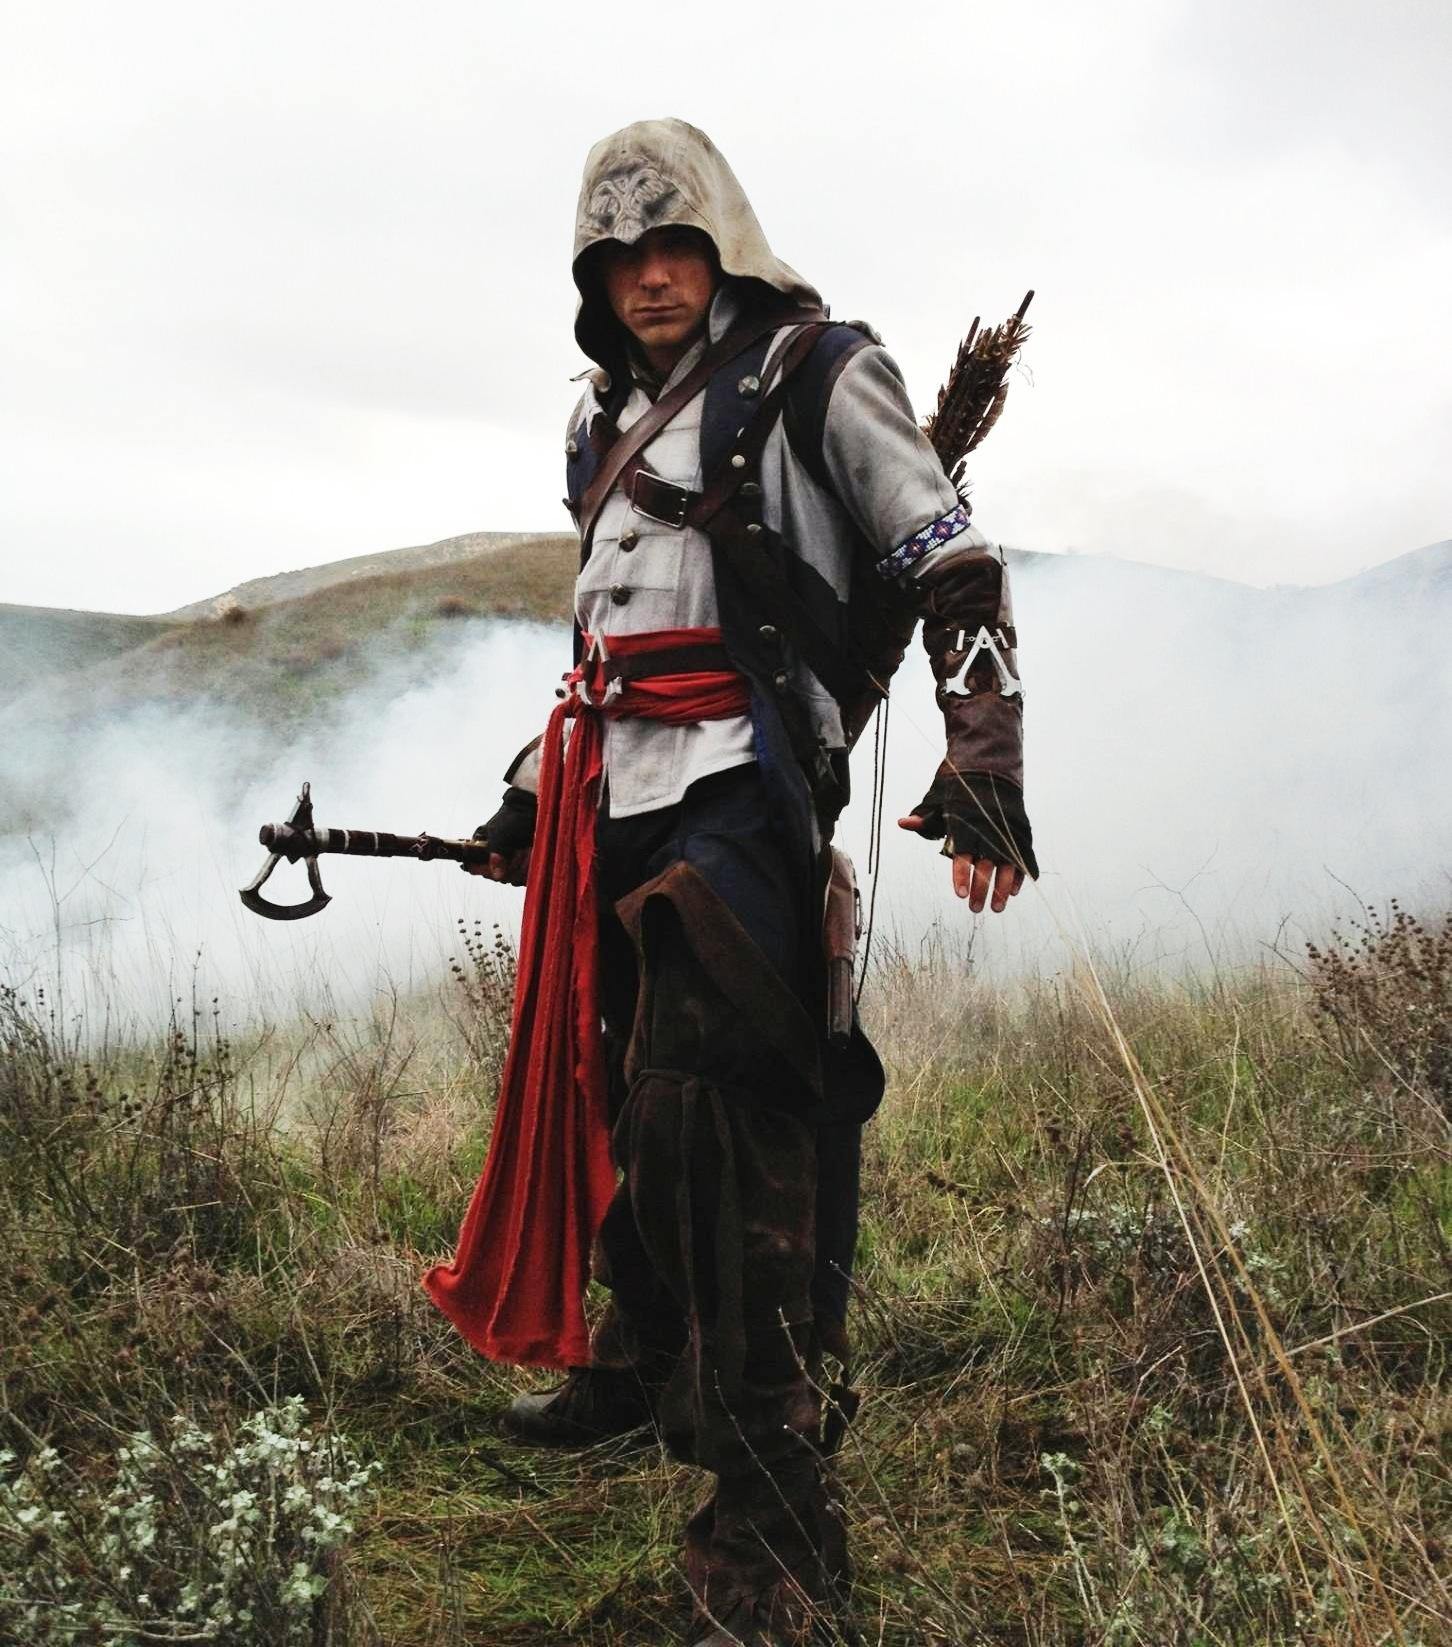 Justin Ray as Connor - Assassins Creed 3 - DICE Awards 2013